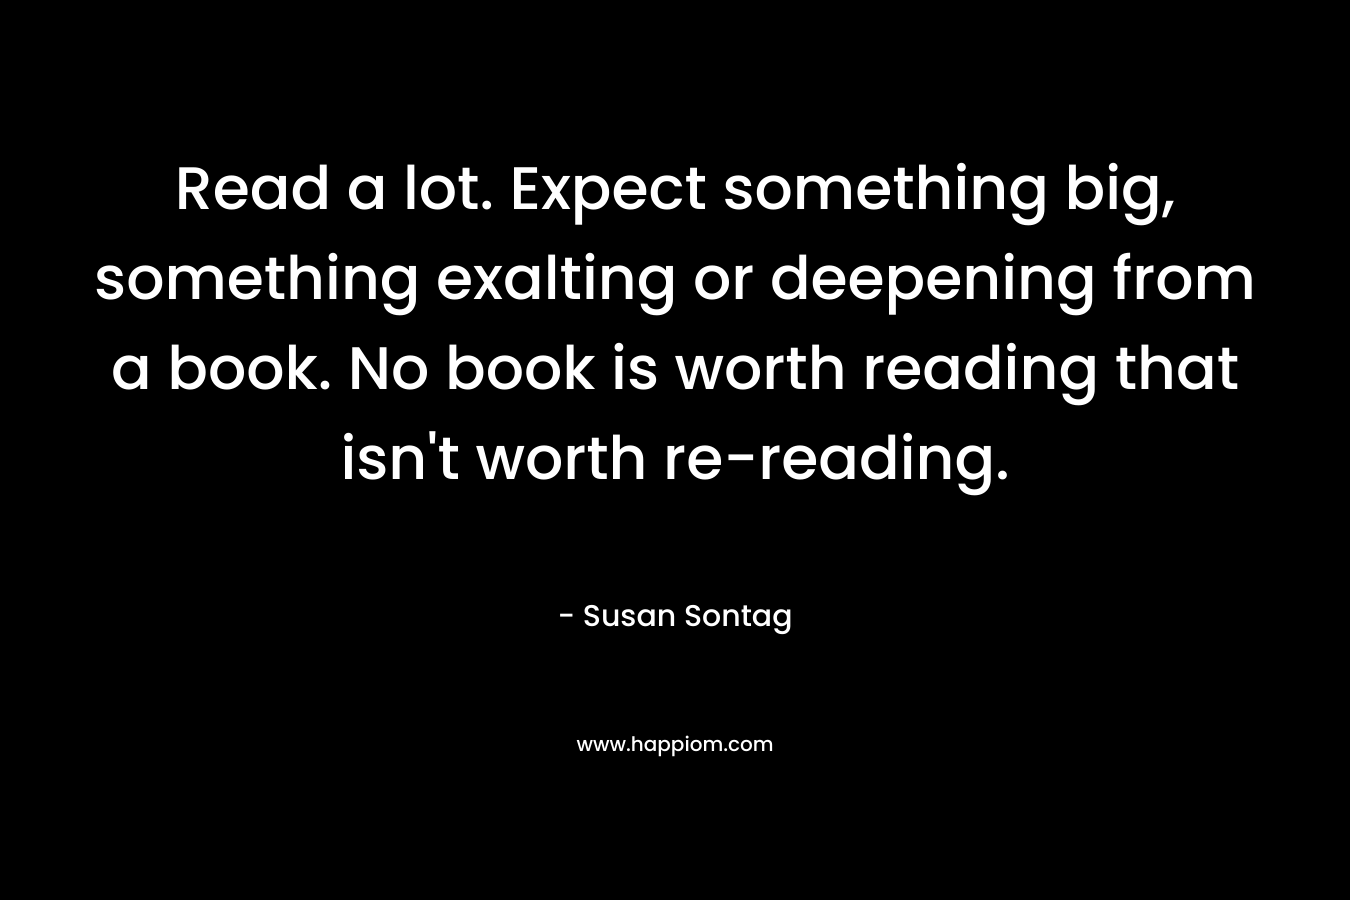 Read a lot. Expect something big, something exalting or deepening from a book. No book is worth reading that isn’t worth re-reading. – Susan Sontag